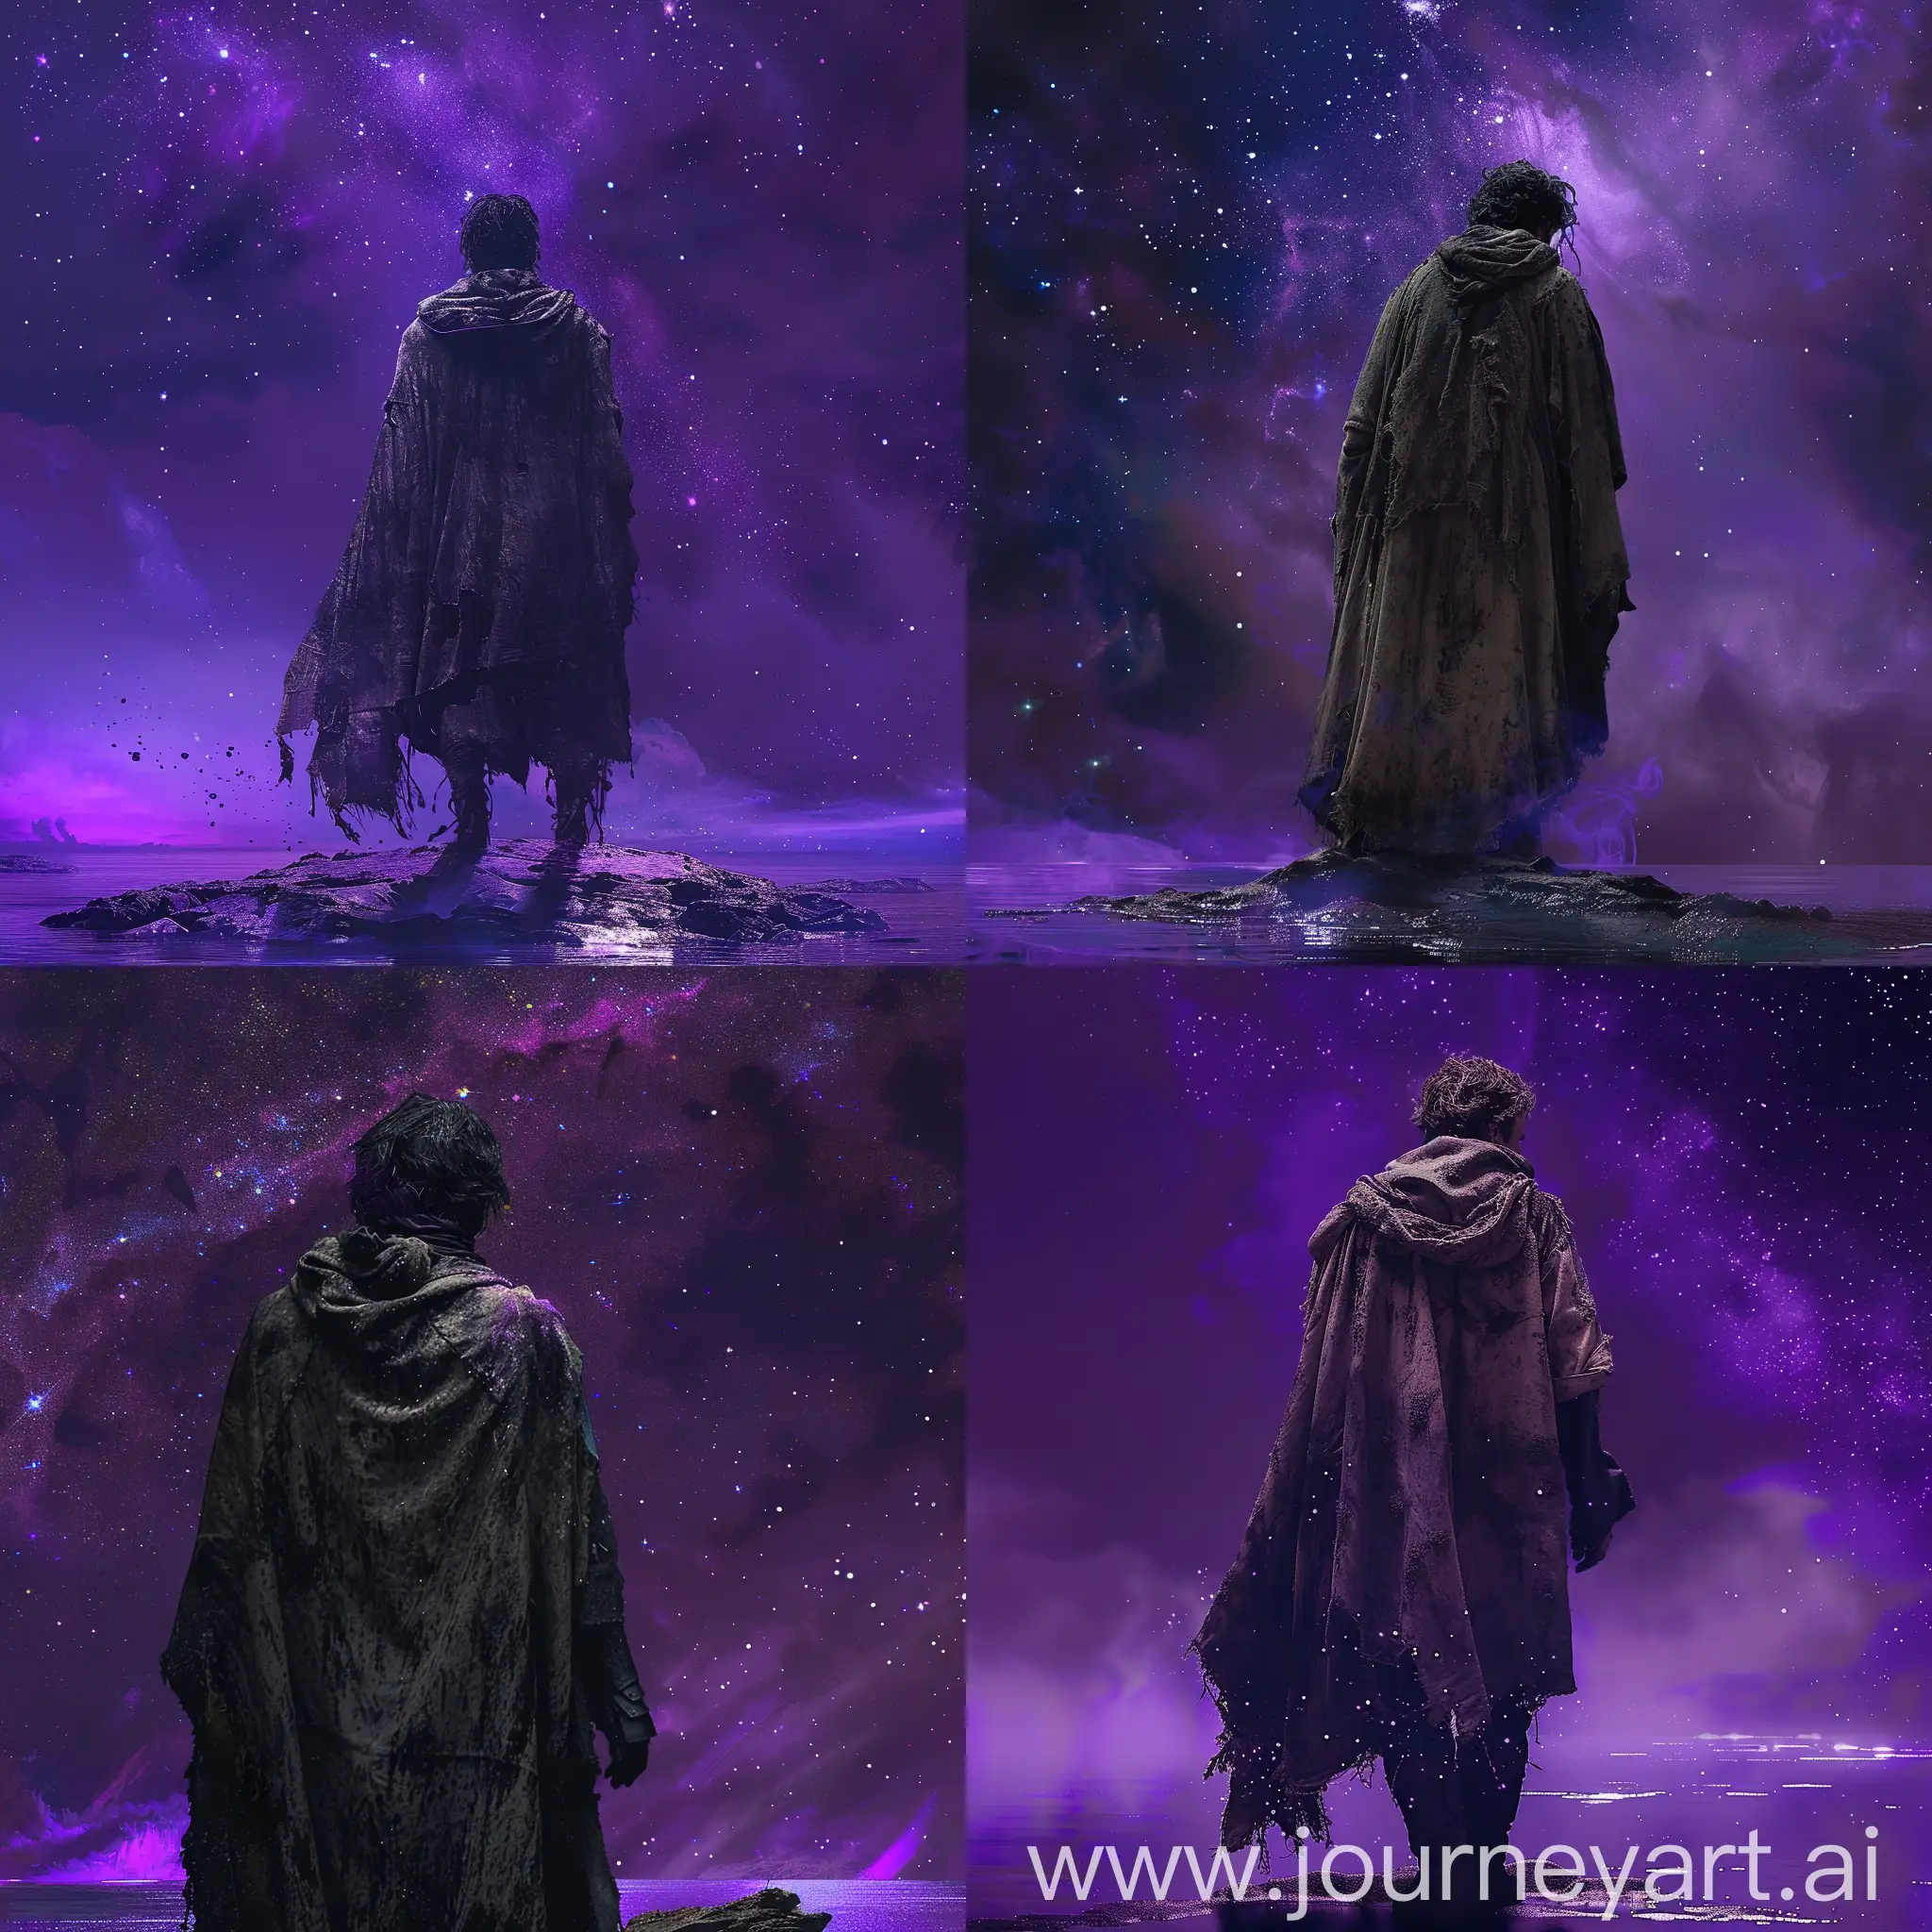 Lonely-Figure-in-Tattered-Cloak-Amidst-Cosmic-Void